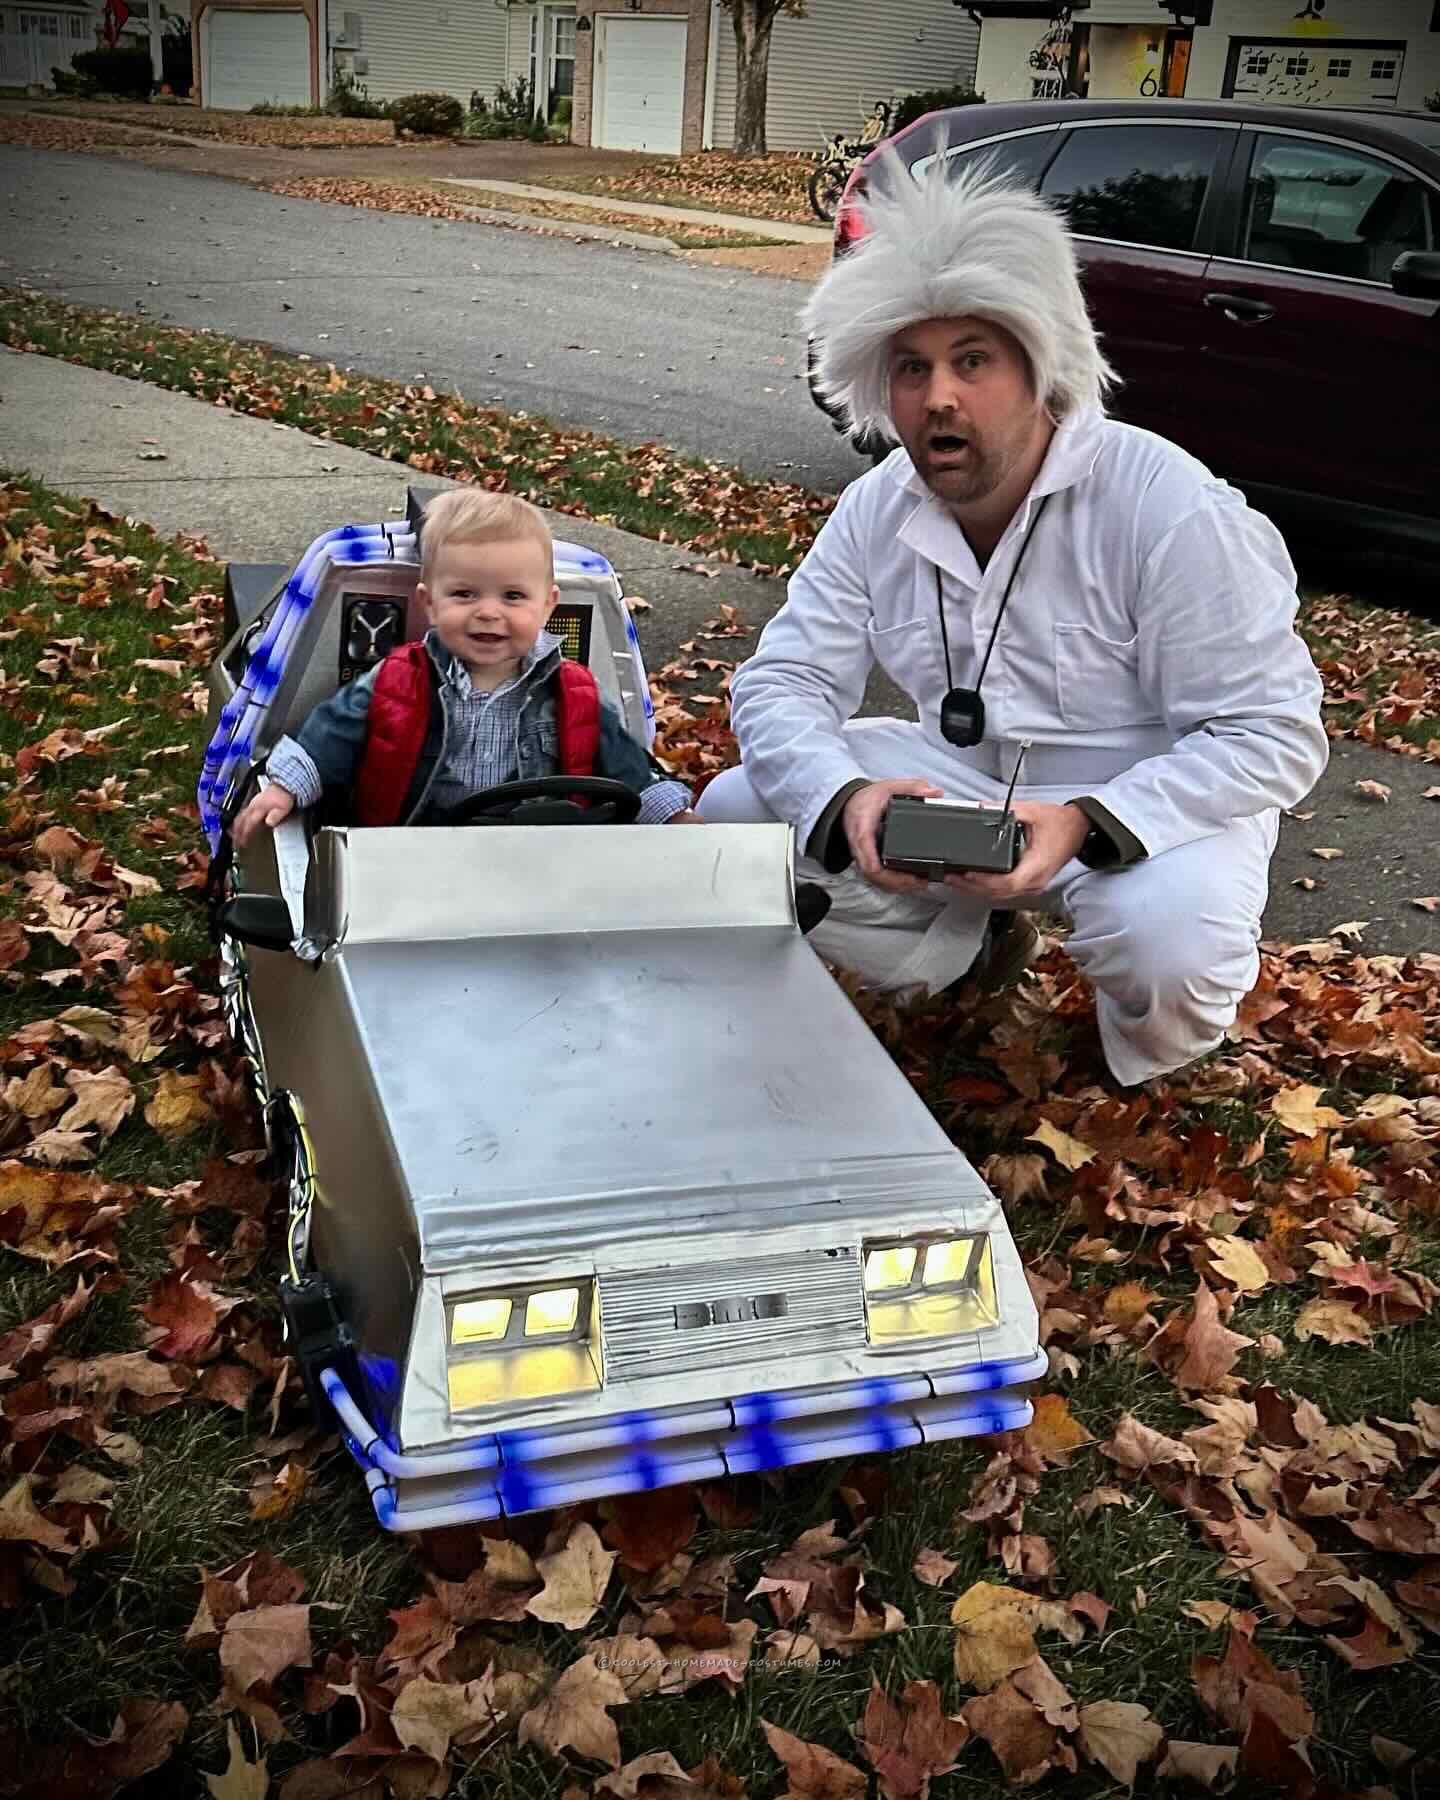 Doc and Marty from Back to the Future